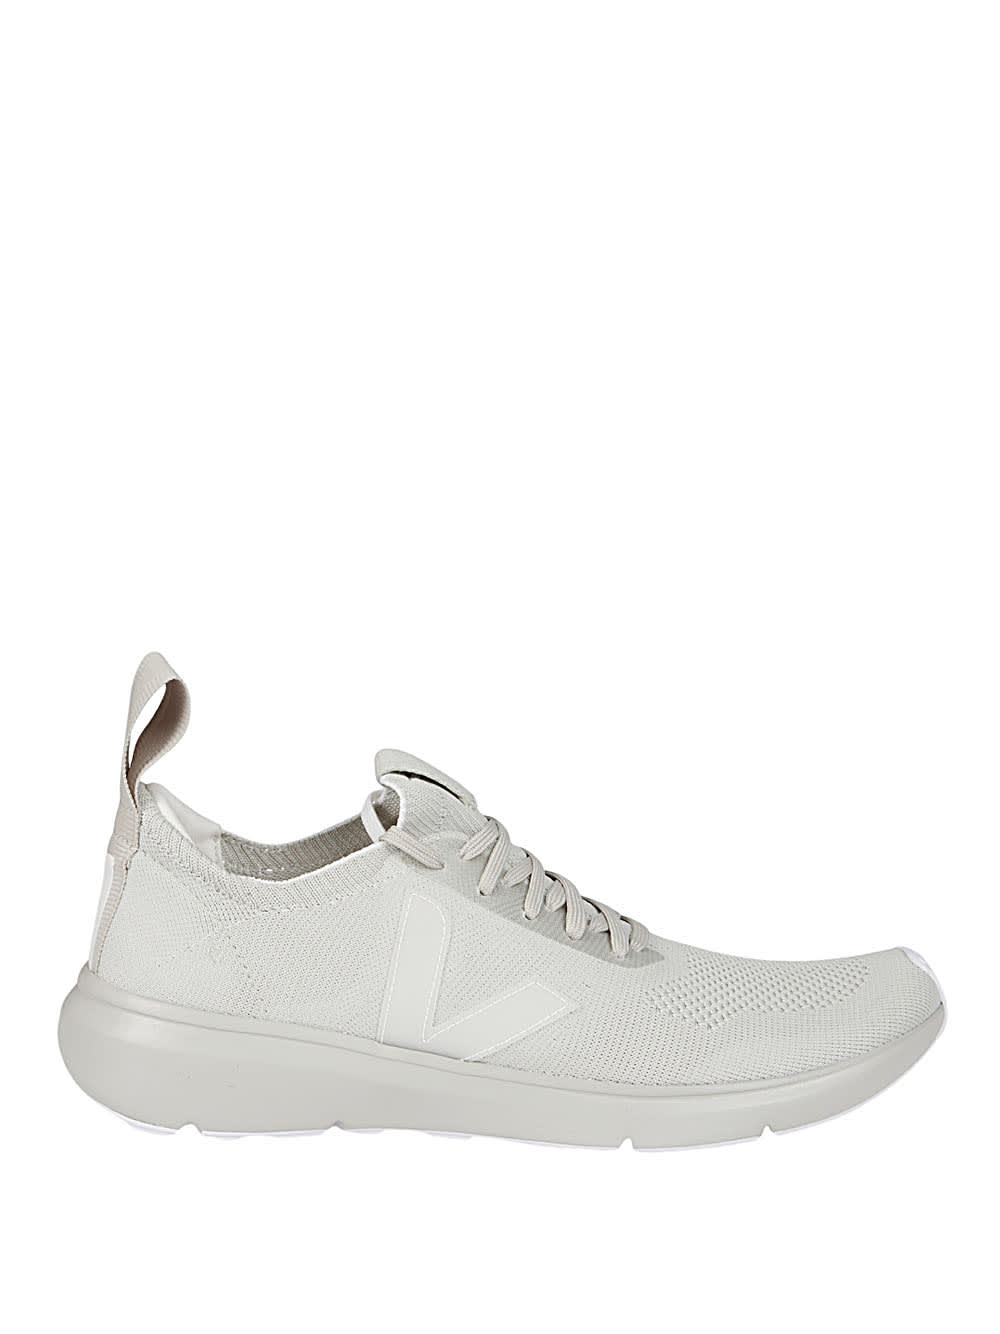 Veja Oyster White Canvas Sneakers